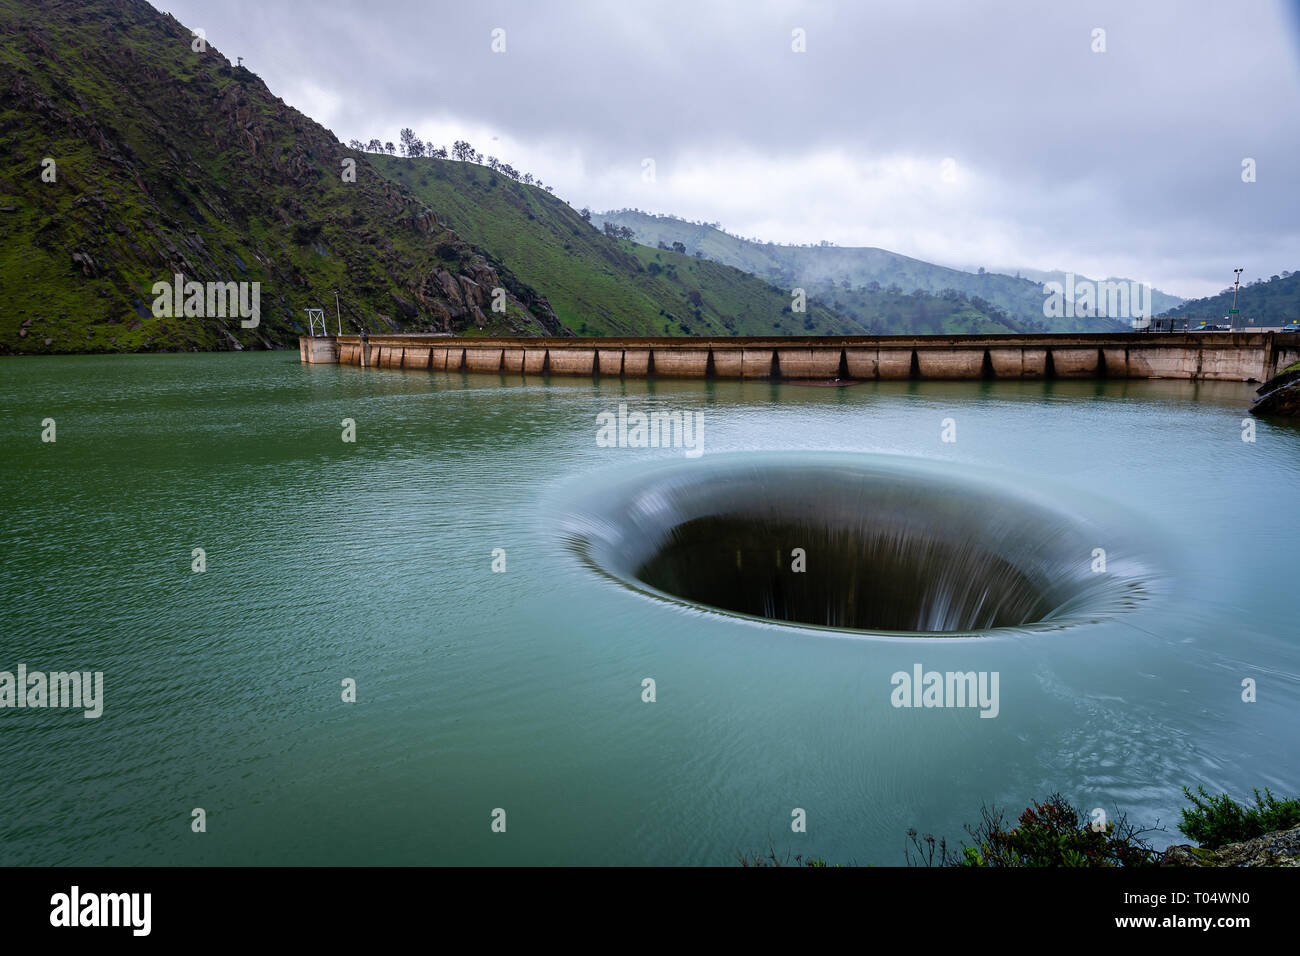 The spectacular 'Glory Hole' spillway in Monticello Dam, California